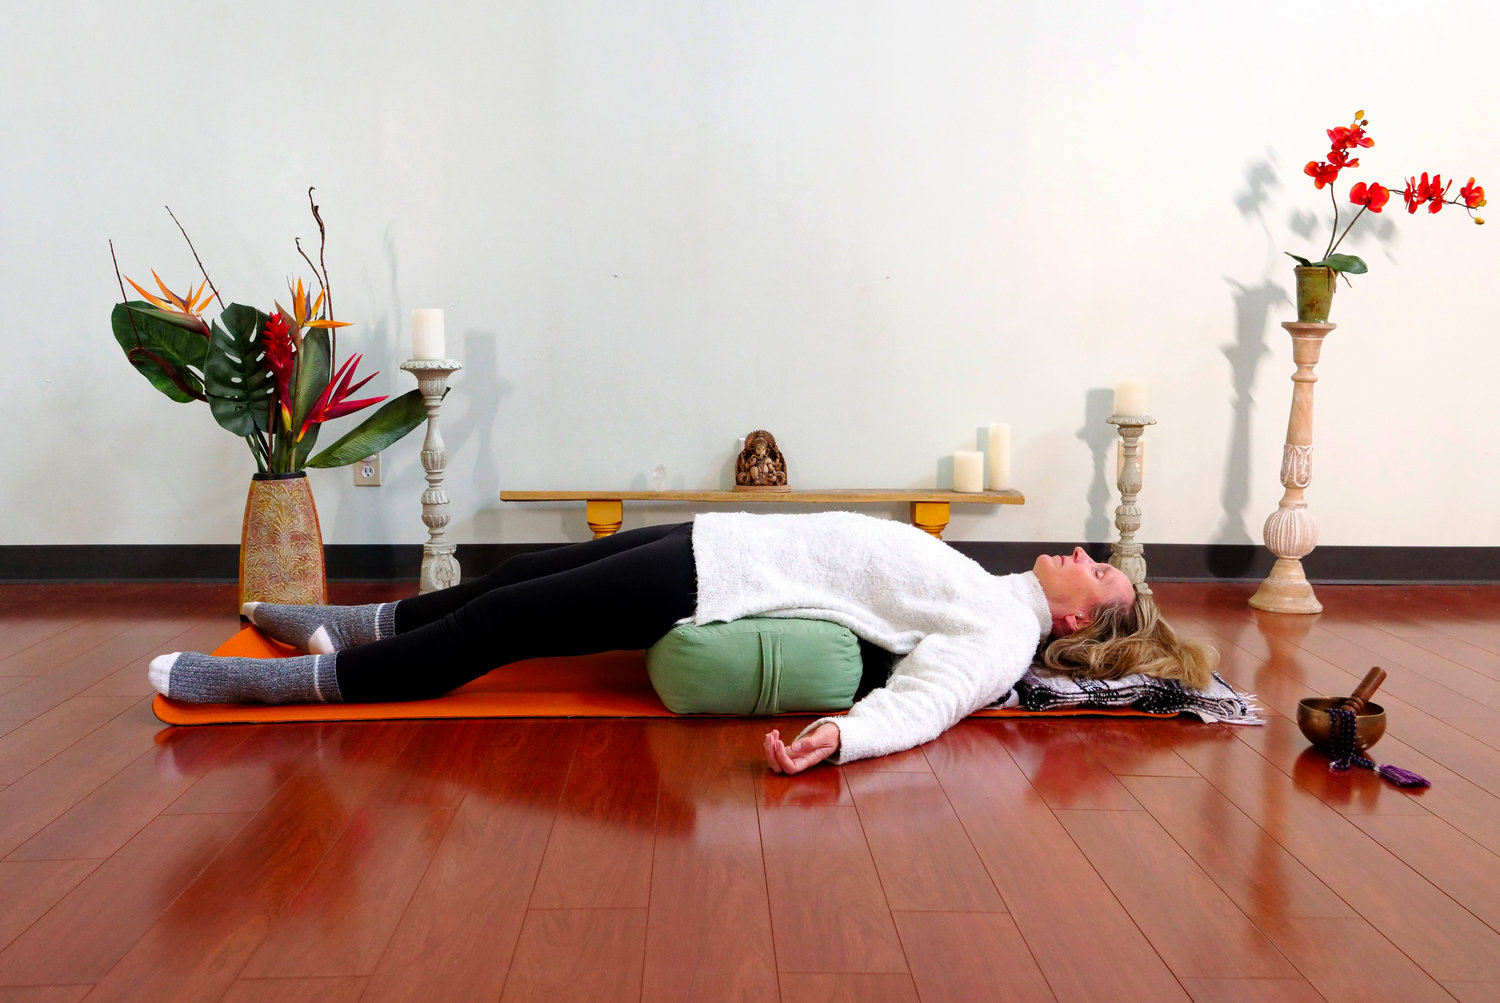 All That Matters yogi Michelle Tremont relaxes into a restorative yoga pose, which preps mind and body for sleep